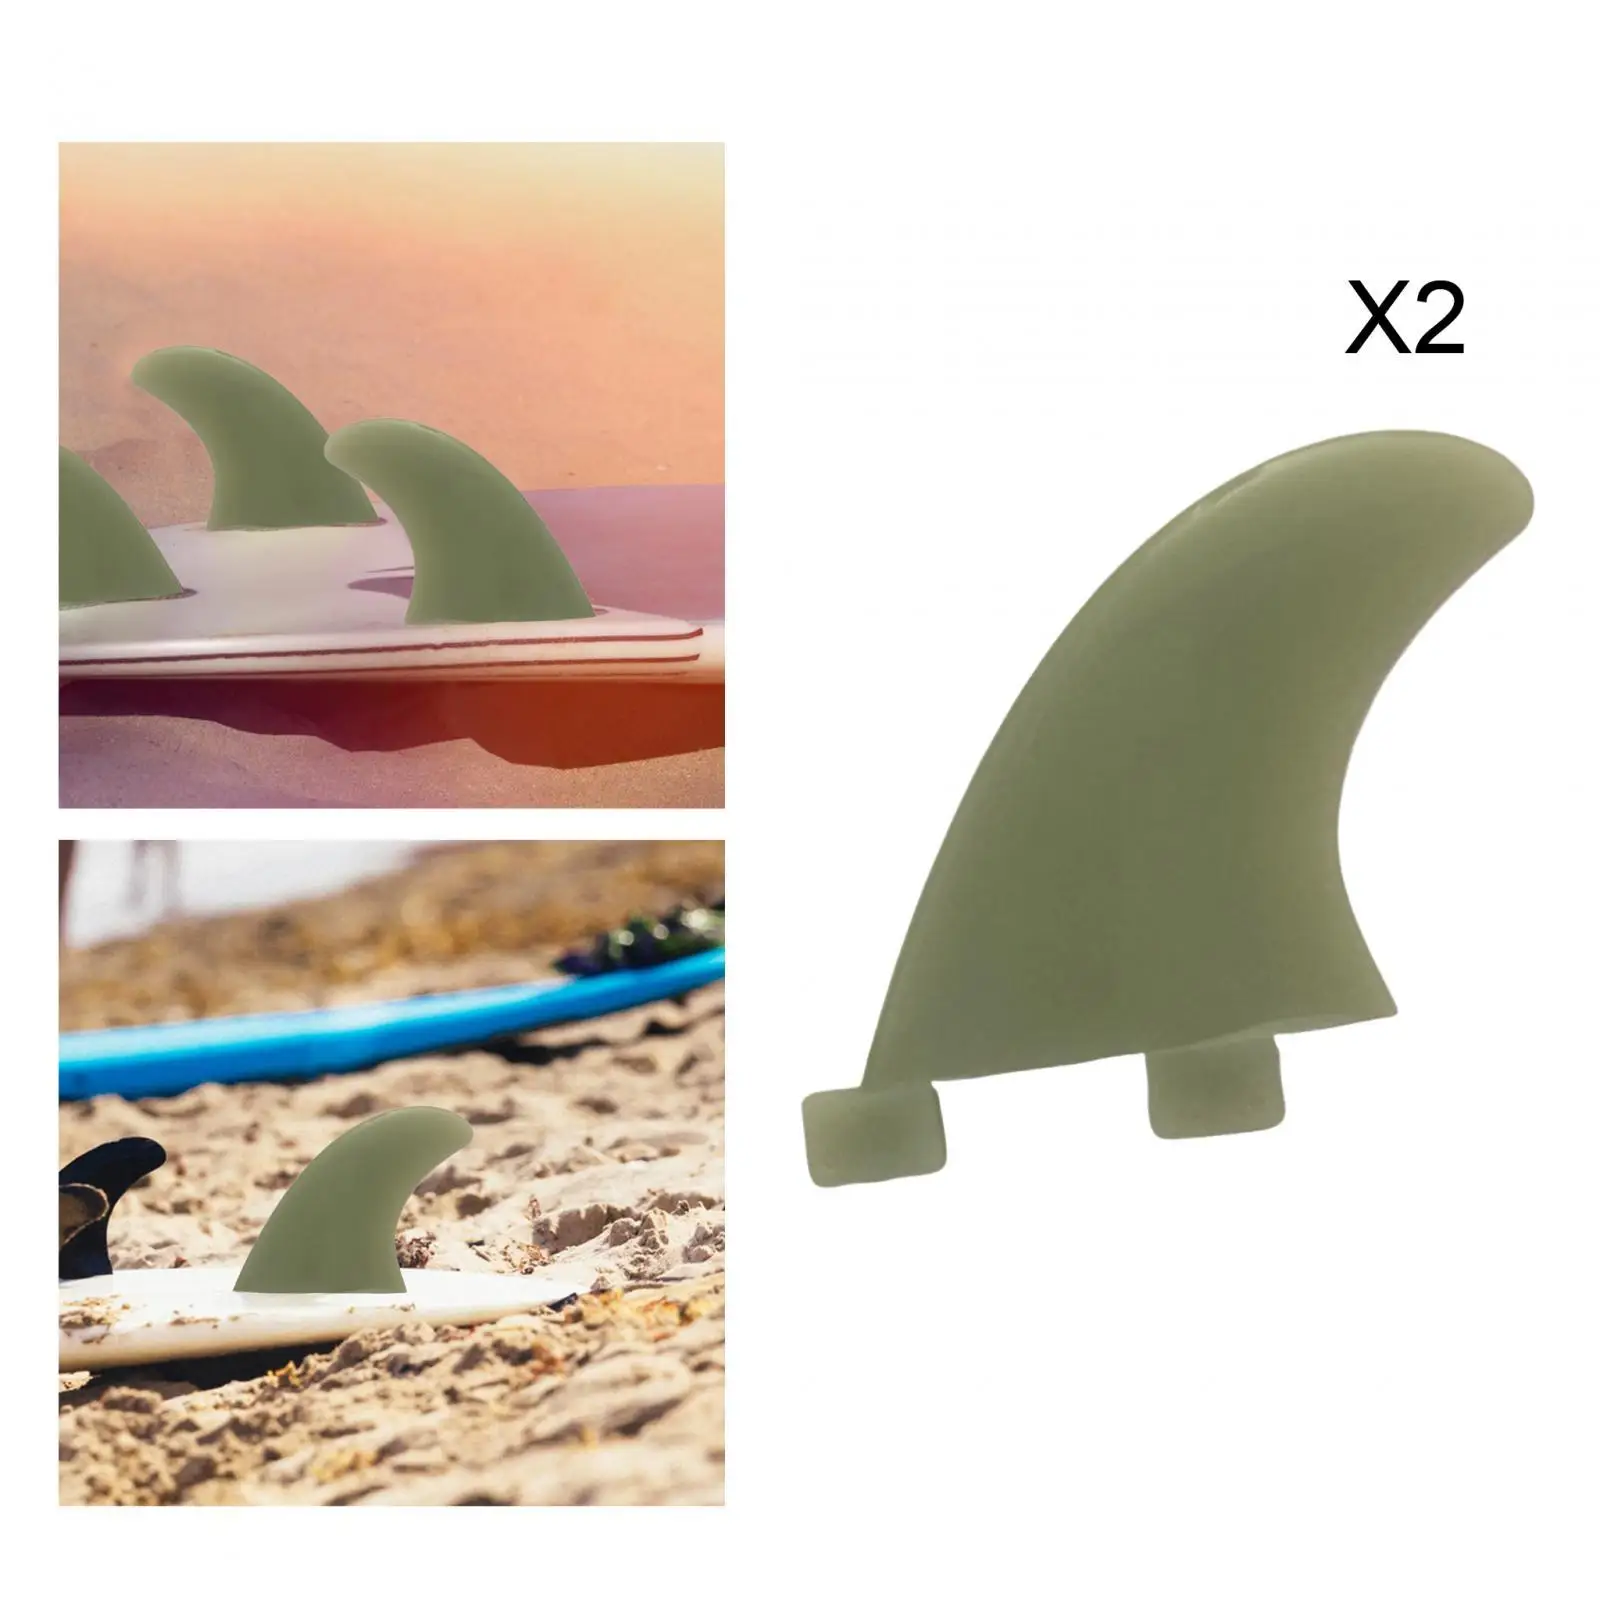 2x Surfboard Fin Surfing Quick Release Durable Replacement for Canoe Paddleboard Longboard Water Sports Accessory